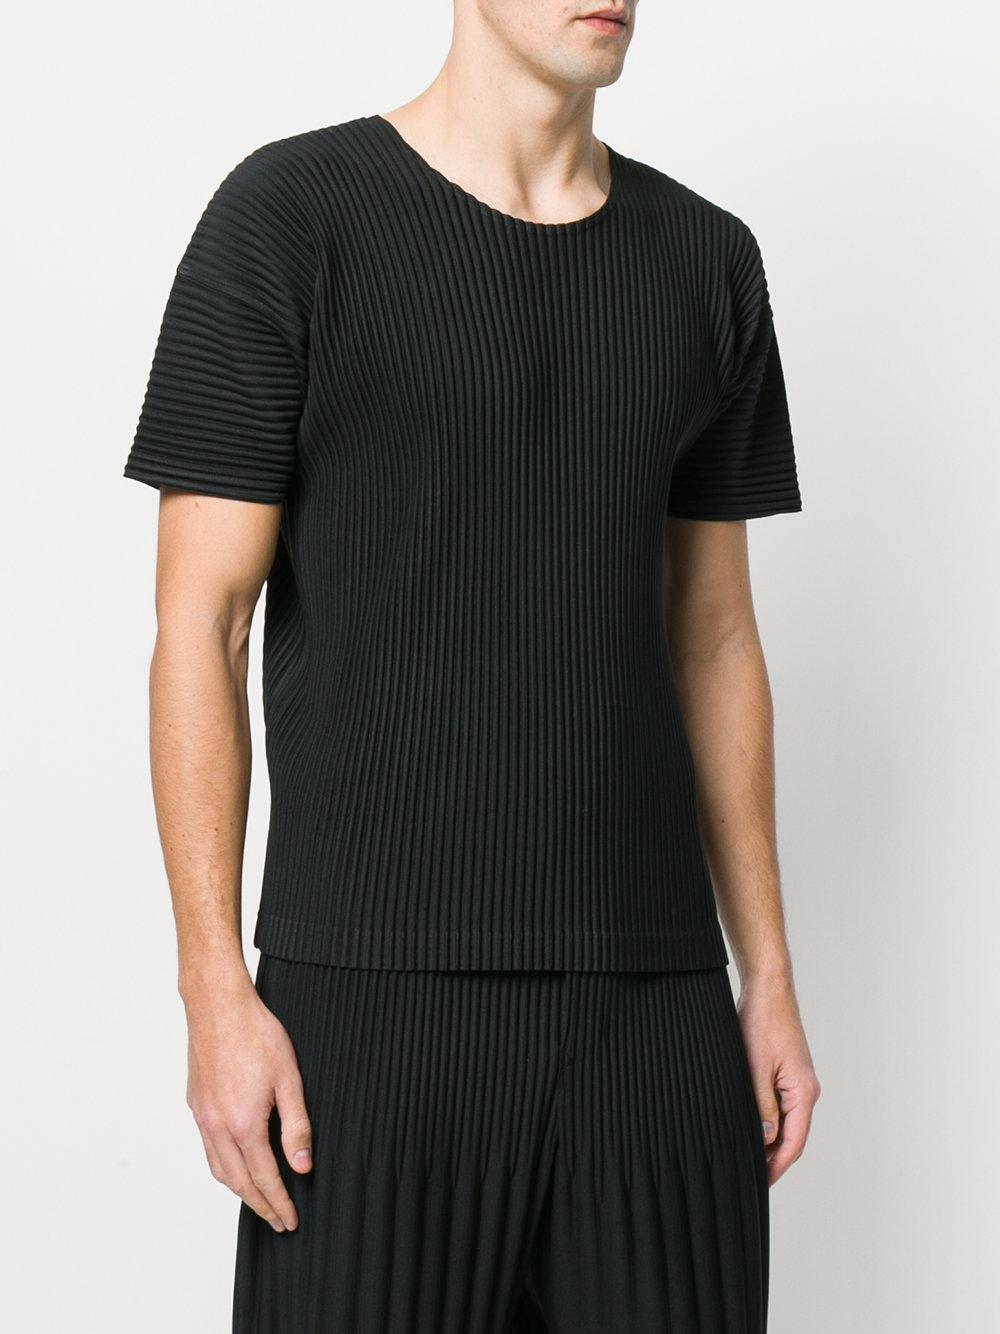 Homme Plissé Issey Miyake Ribbed Effect T-shirt in Black for Men - Lyst